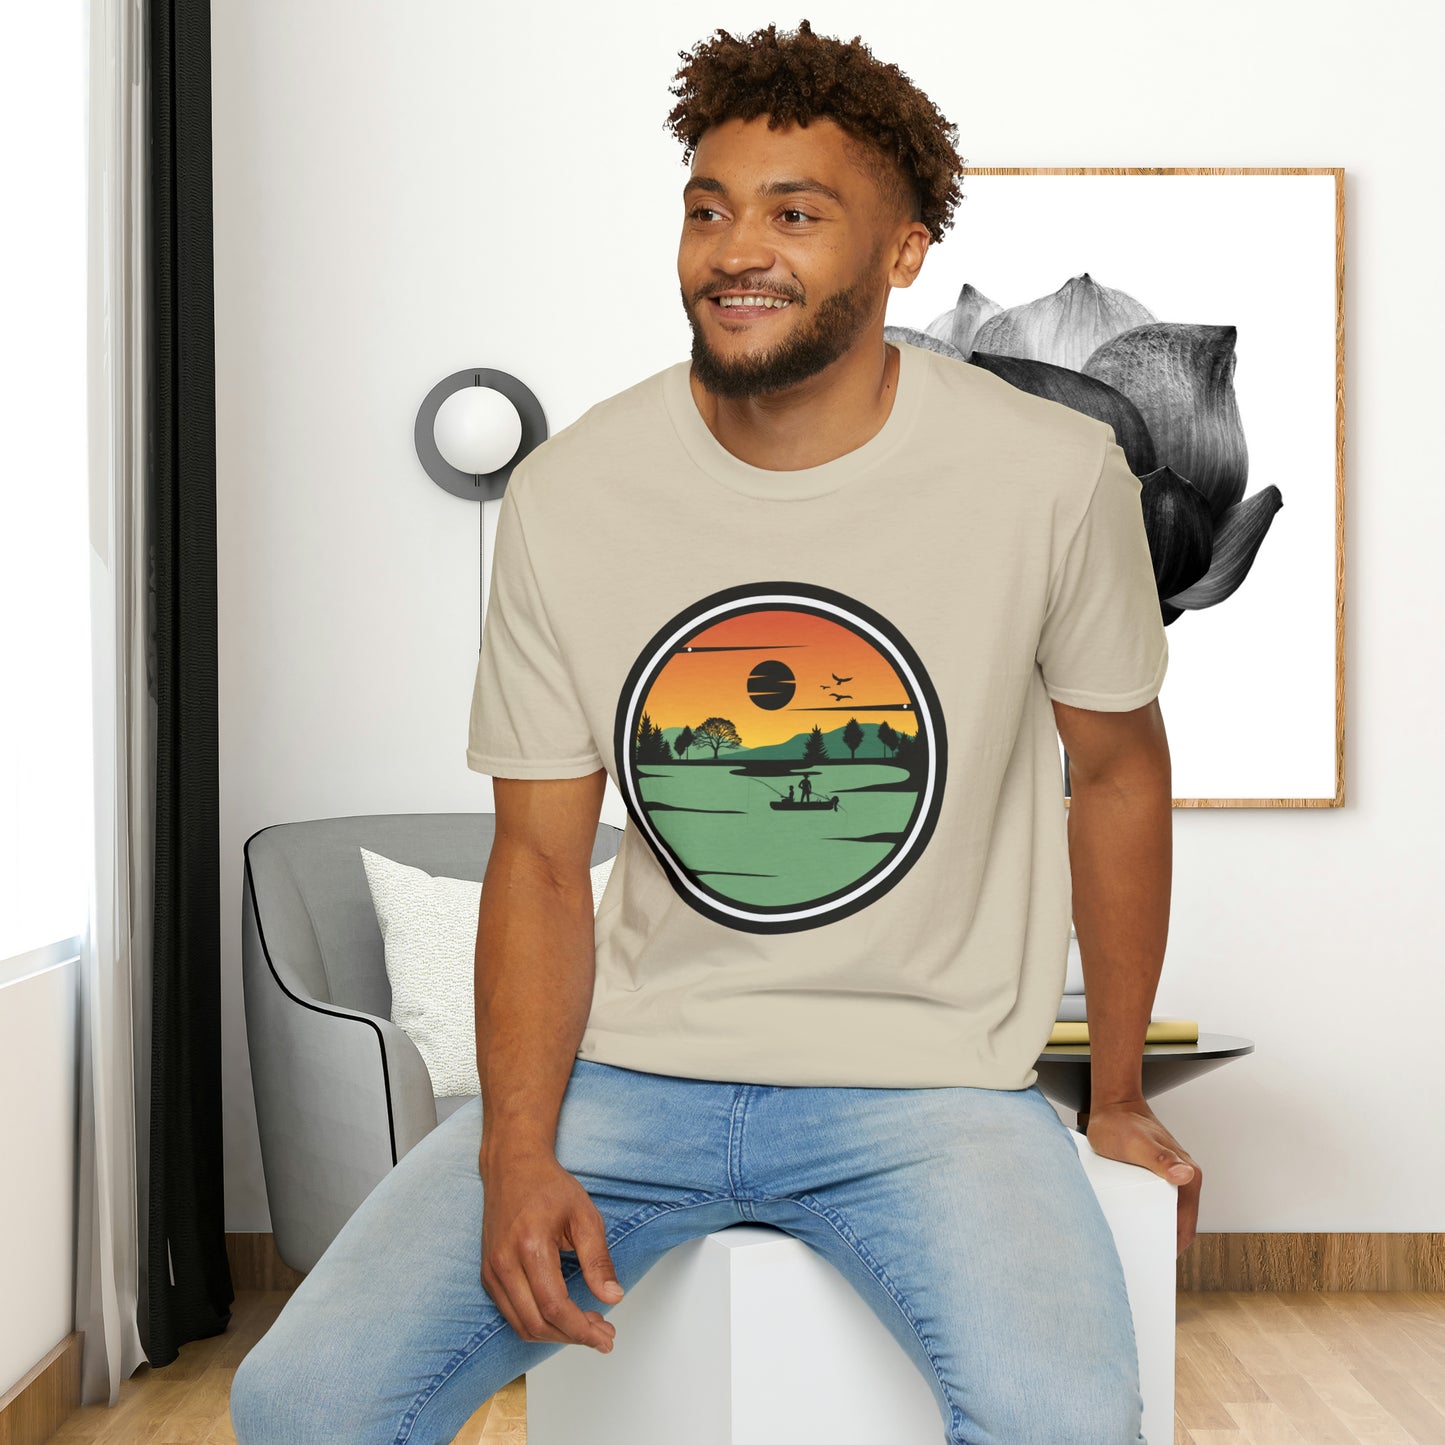 Spend time in the great outdoors! Be rejuvenated and amazed at the beauty of nature. This is a Unisex Softstyle T-Shirt.